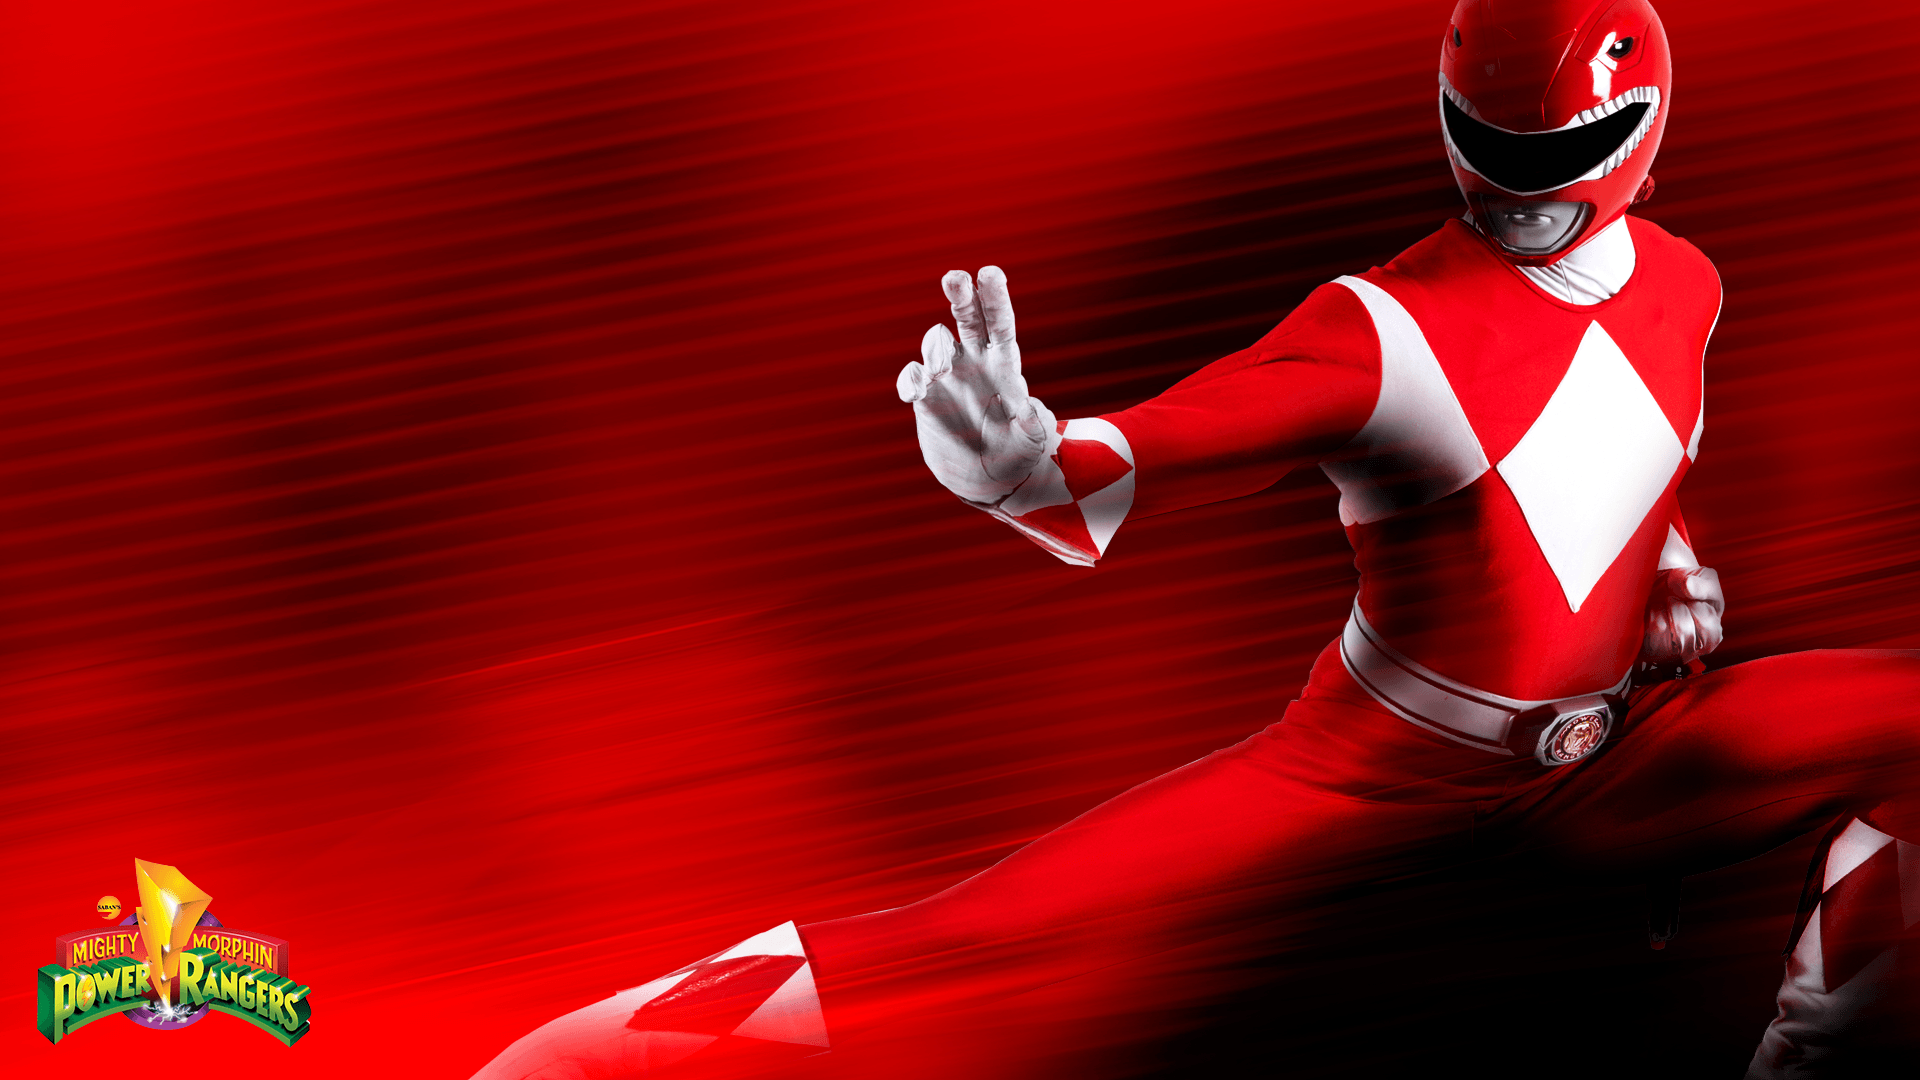 Power Rangers Wallpaper Group Picture